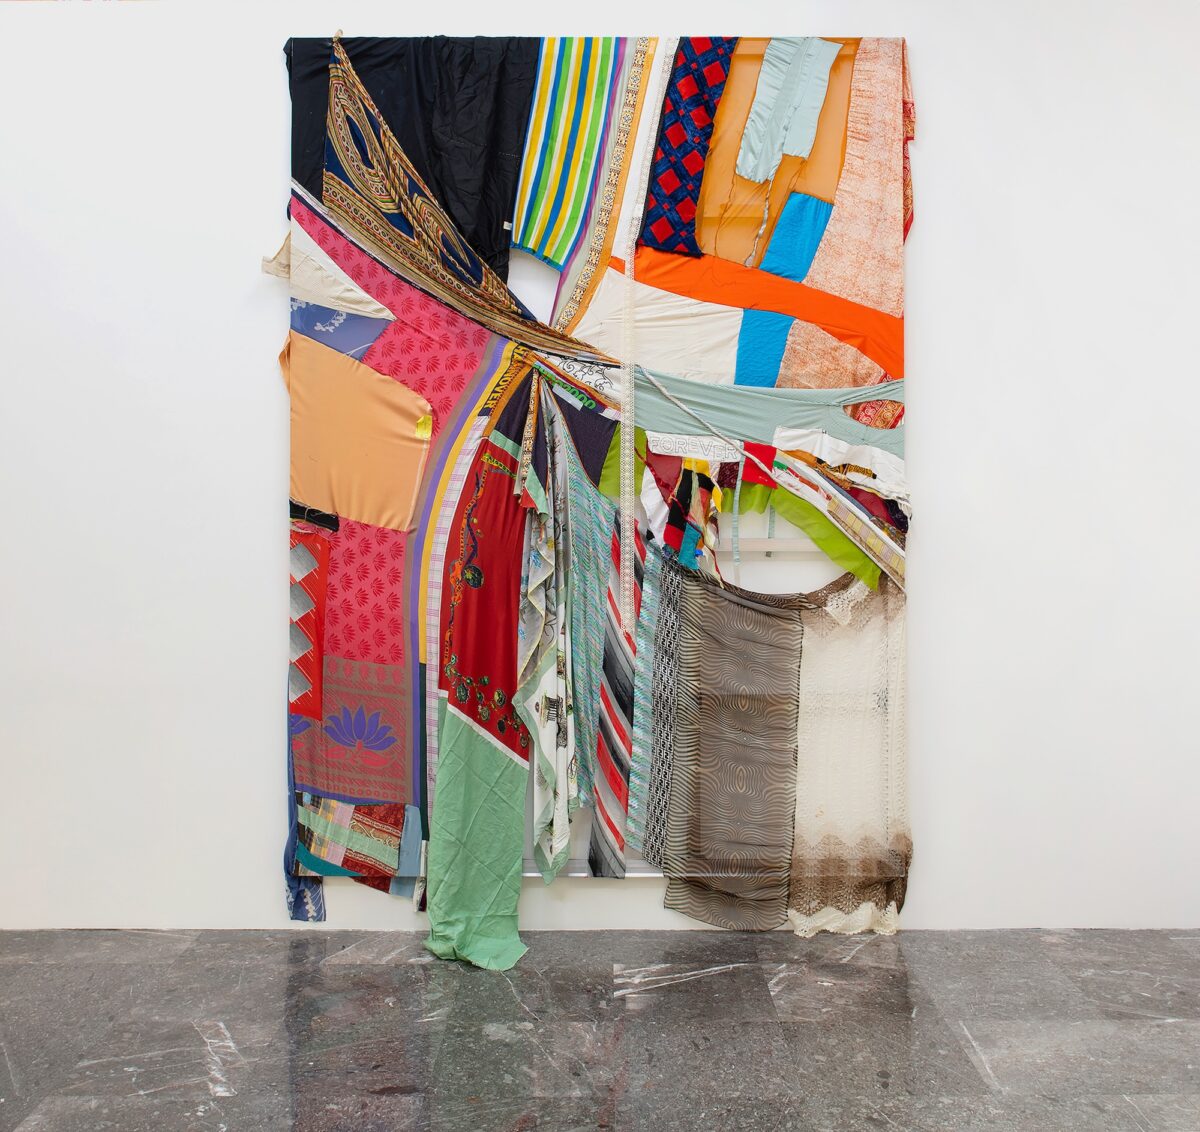 ERIC N. MACKThere Is No Other Way, 2022Silk and wool scarves, cotton apron, Irish linen, rope, ribbon, polyester, felt, cotton shirt, and wool128 x 88 inches (325.1 x 223.5 cm)© Eric N. MackPhoto: WhiteBalanceMXCourtesy of the artist, Morán Morán and Gagosian